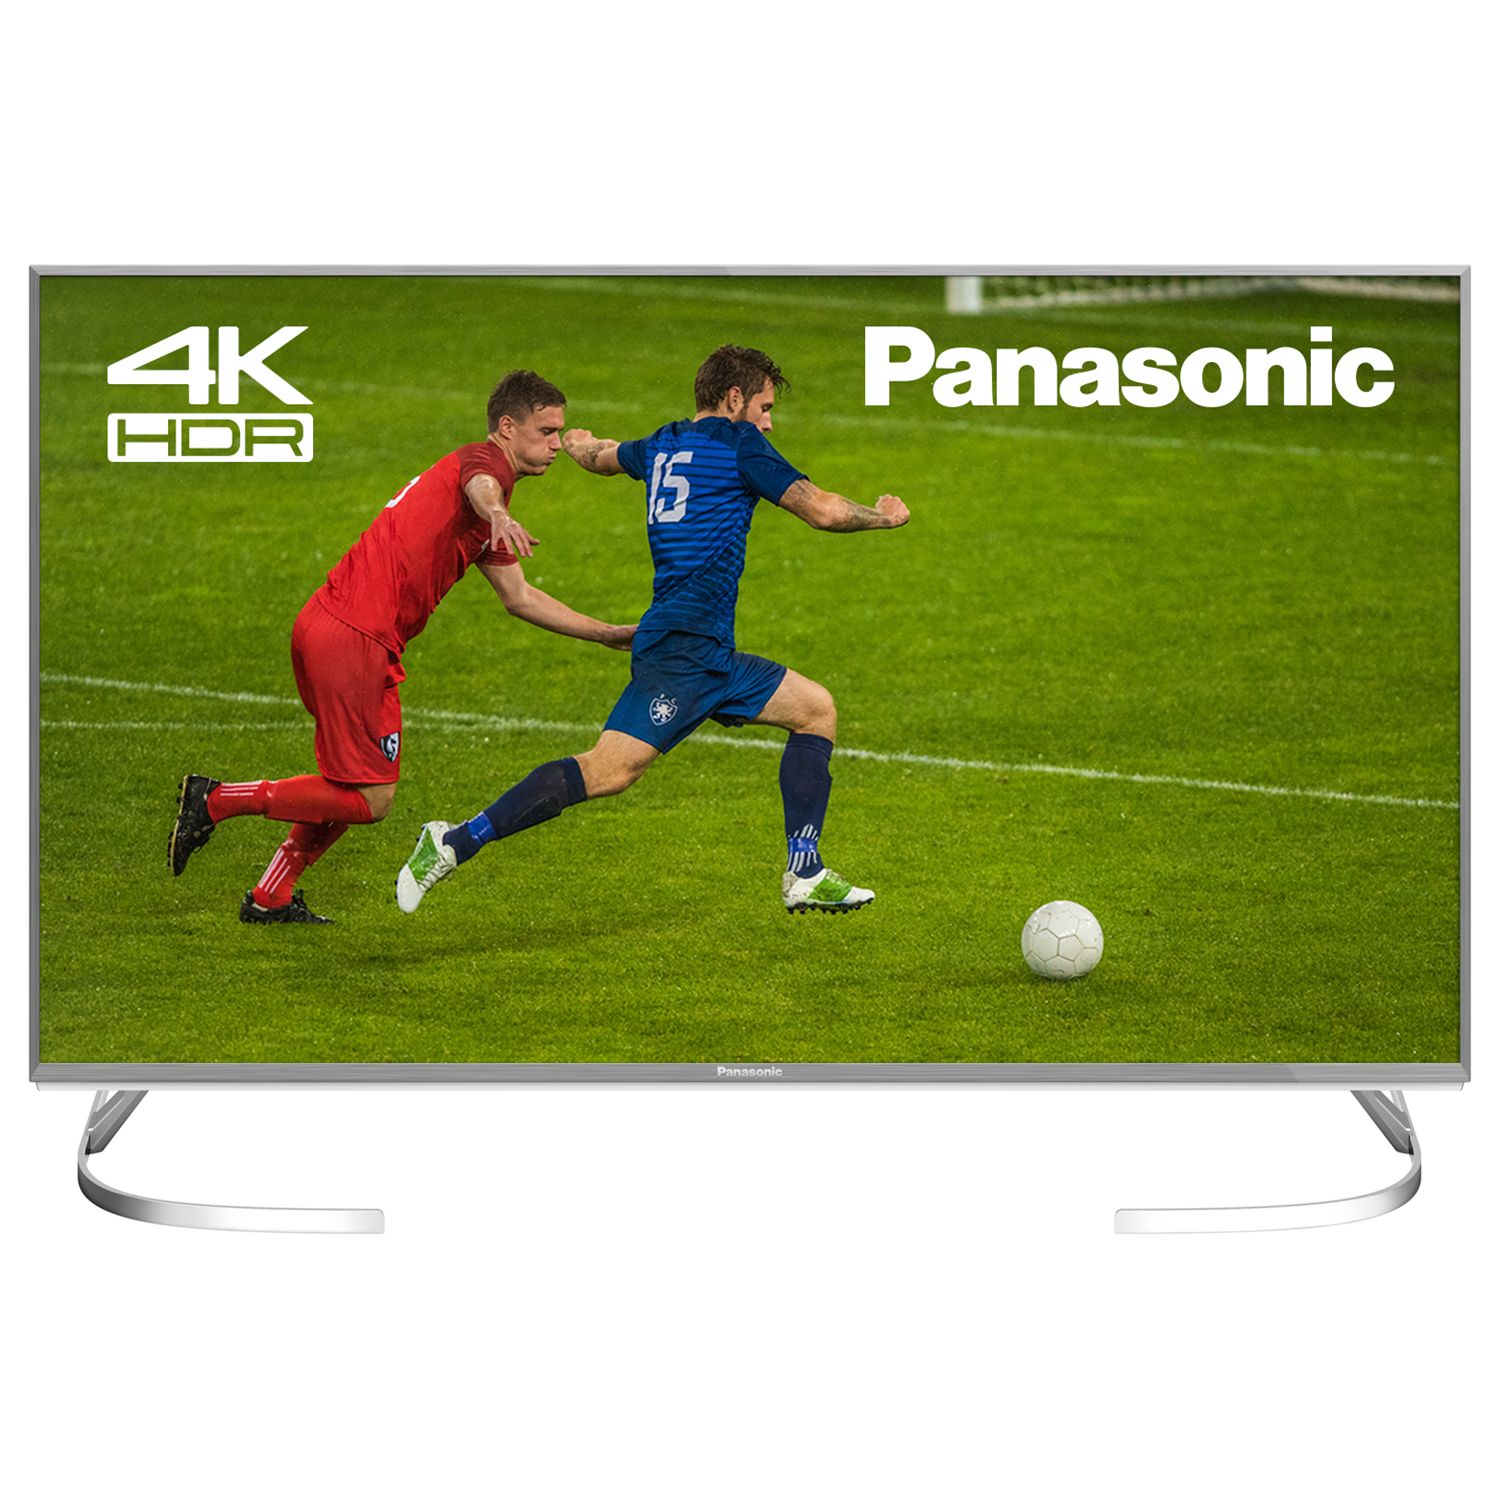 Panasonic TX-40EX700B LED HDR 4K Ultra HD Smart TV, 40" with Freeview Play, Slim Metallic Bezel & Switch Design Adjustable Stand, Ultra HD Certified, Silver